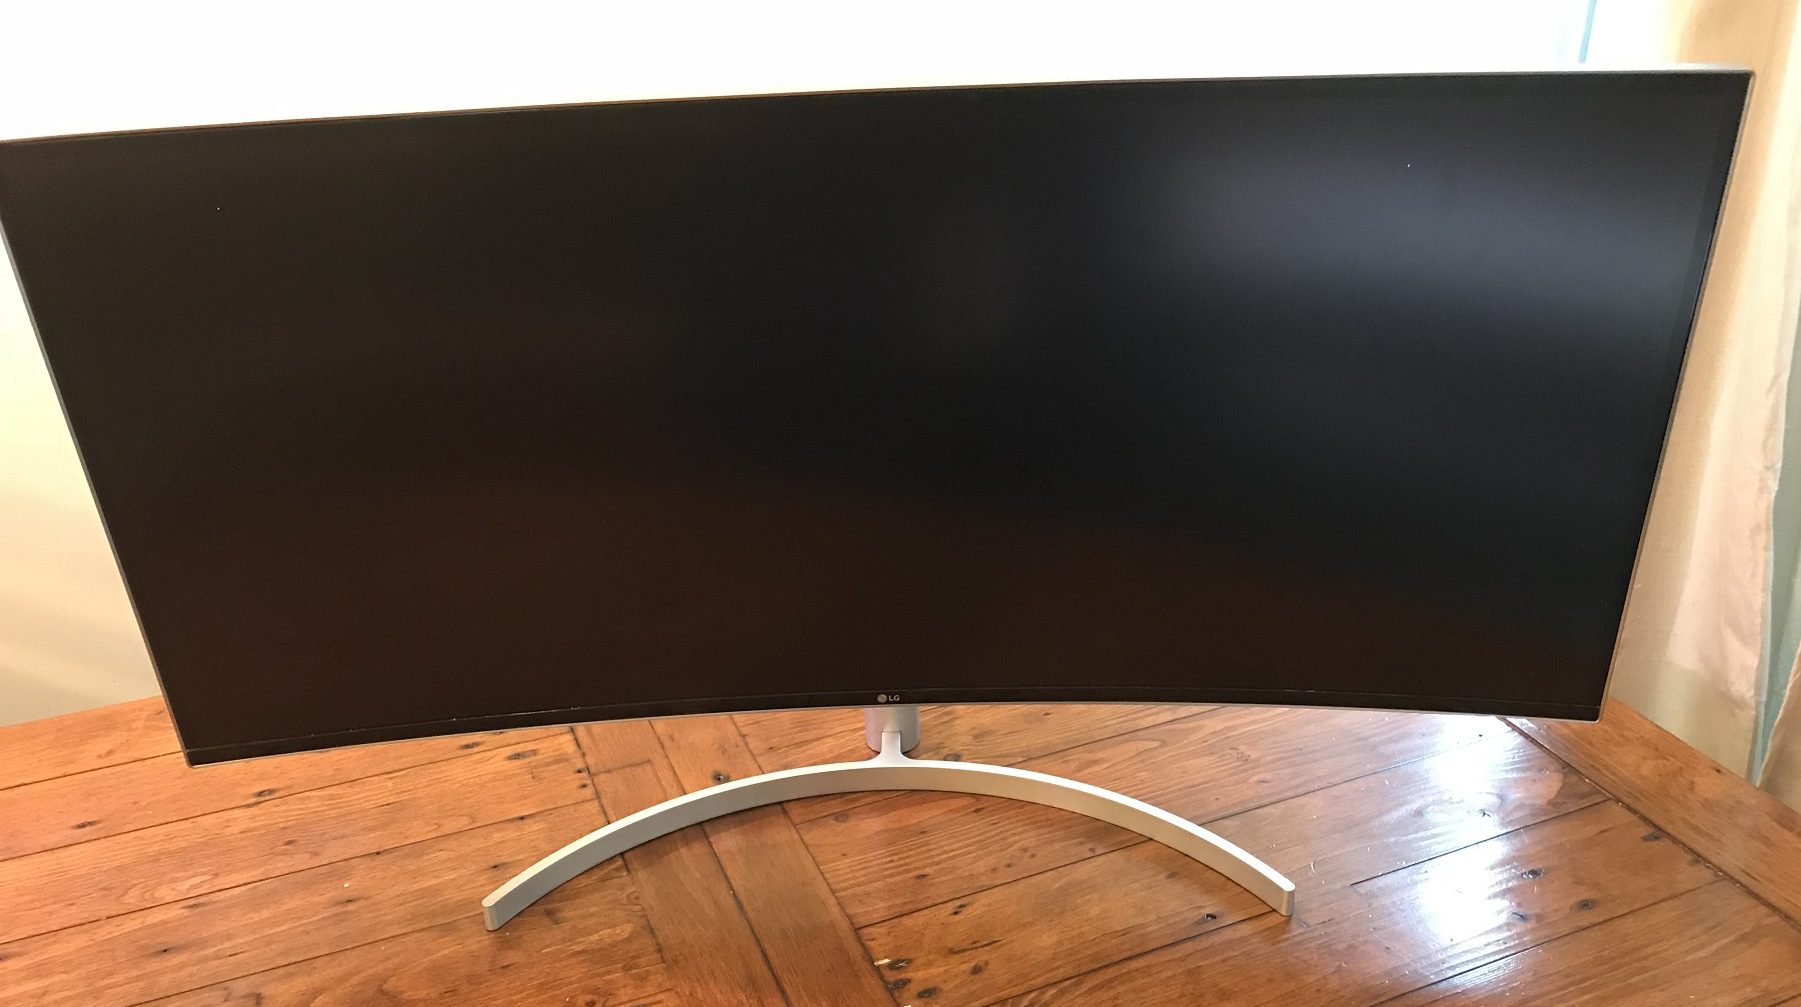 LG 38WK95C Curved 38” UltraWide Monitor review | Best Buy Blog